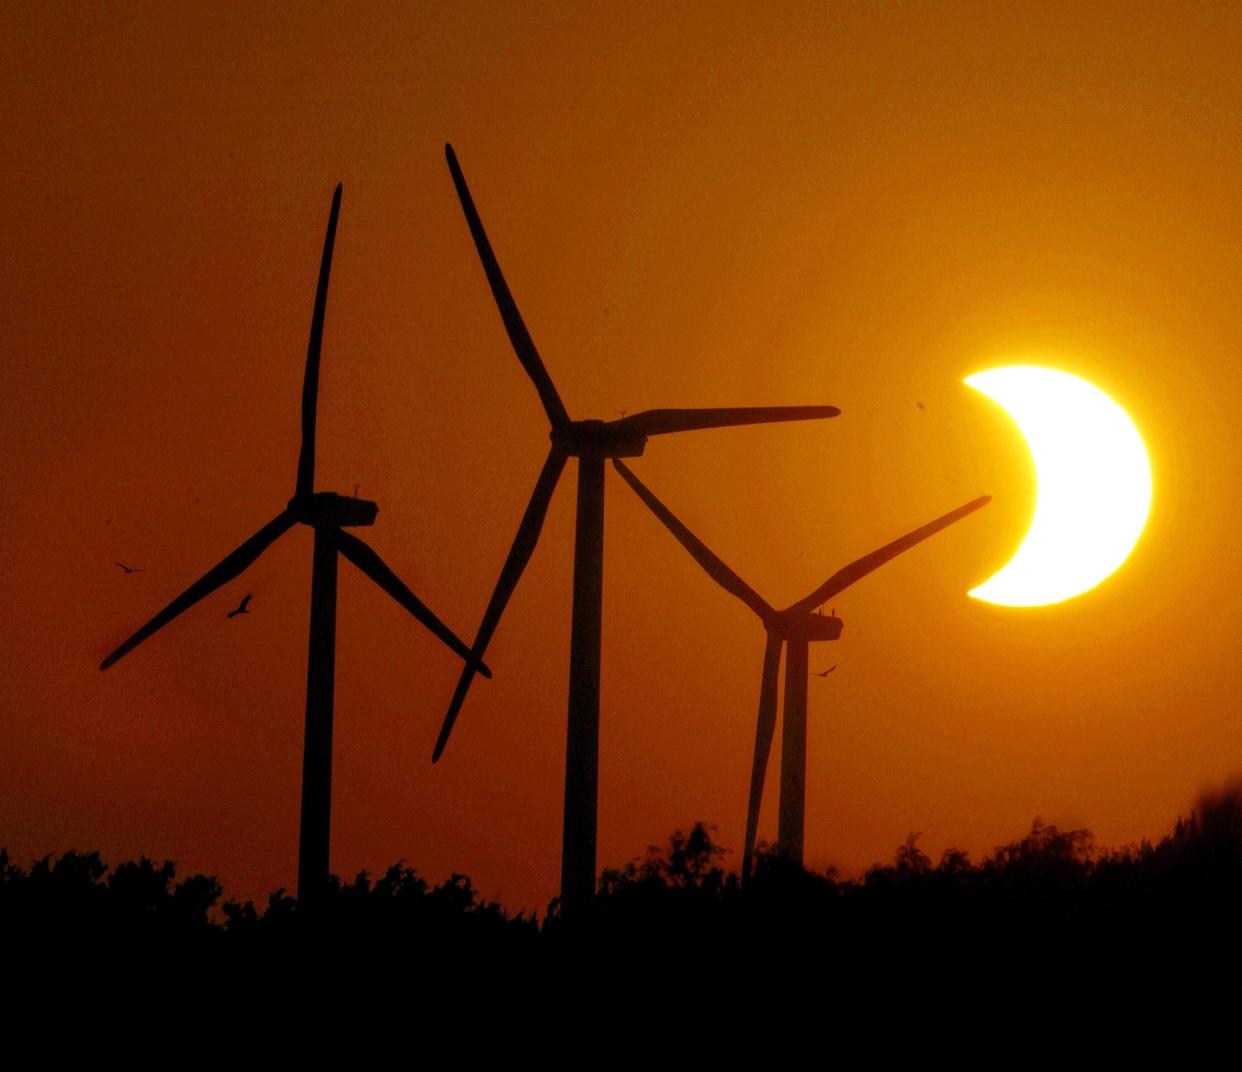 Hawks and wind turbines spin lazy circles in the air near Trent, Texas, as a partial eclipse of the sun makes for a unique sunset June 10, 2002.